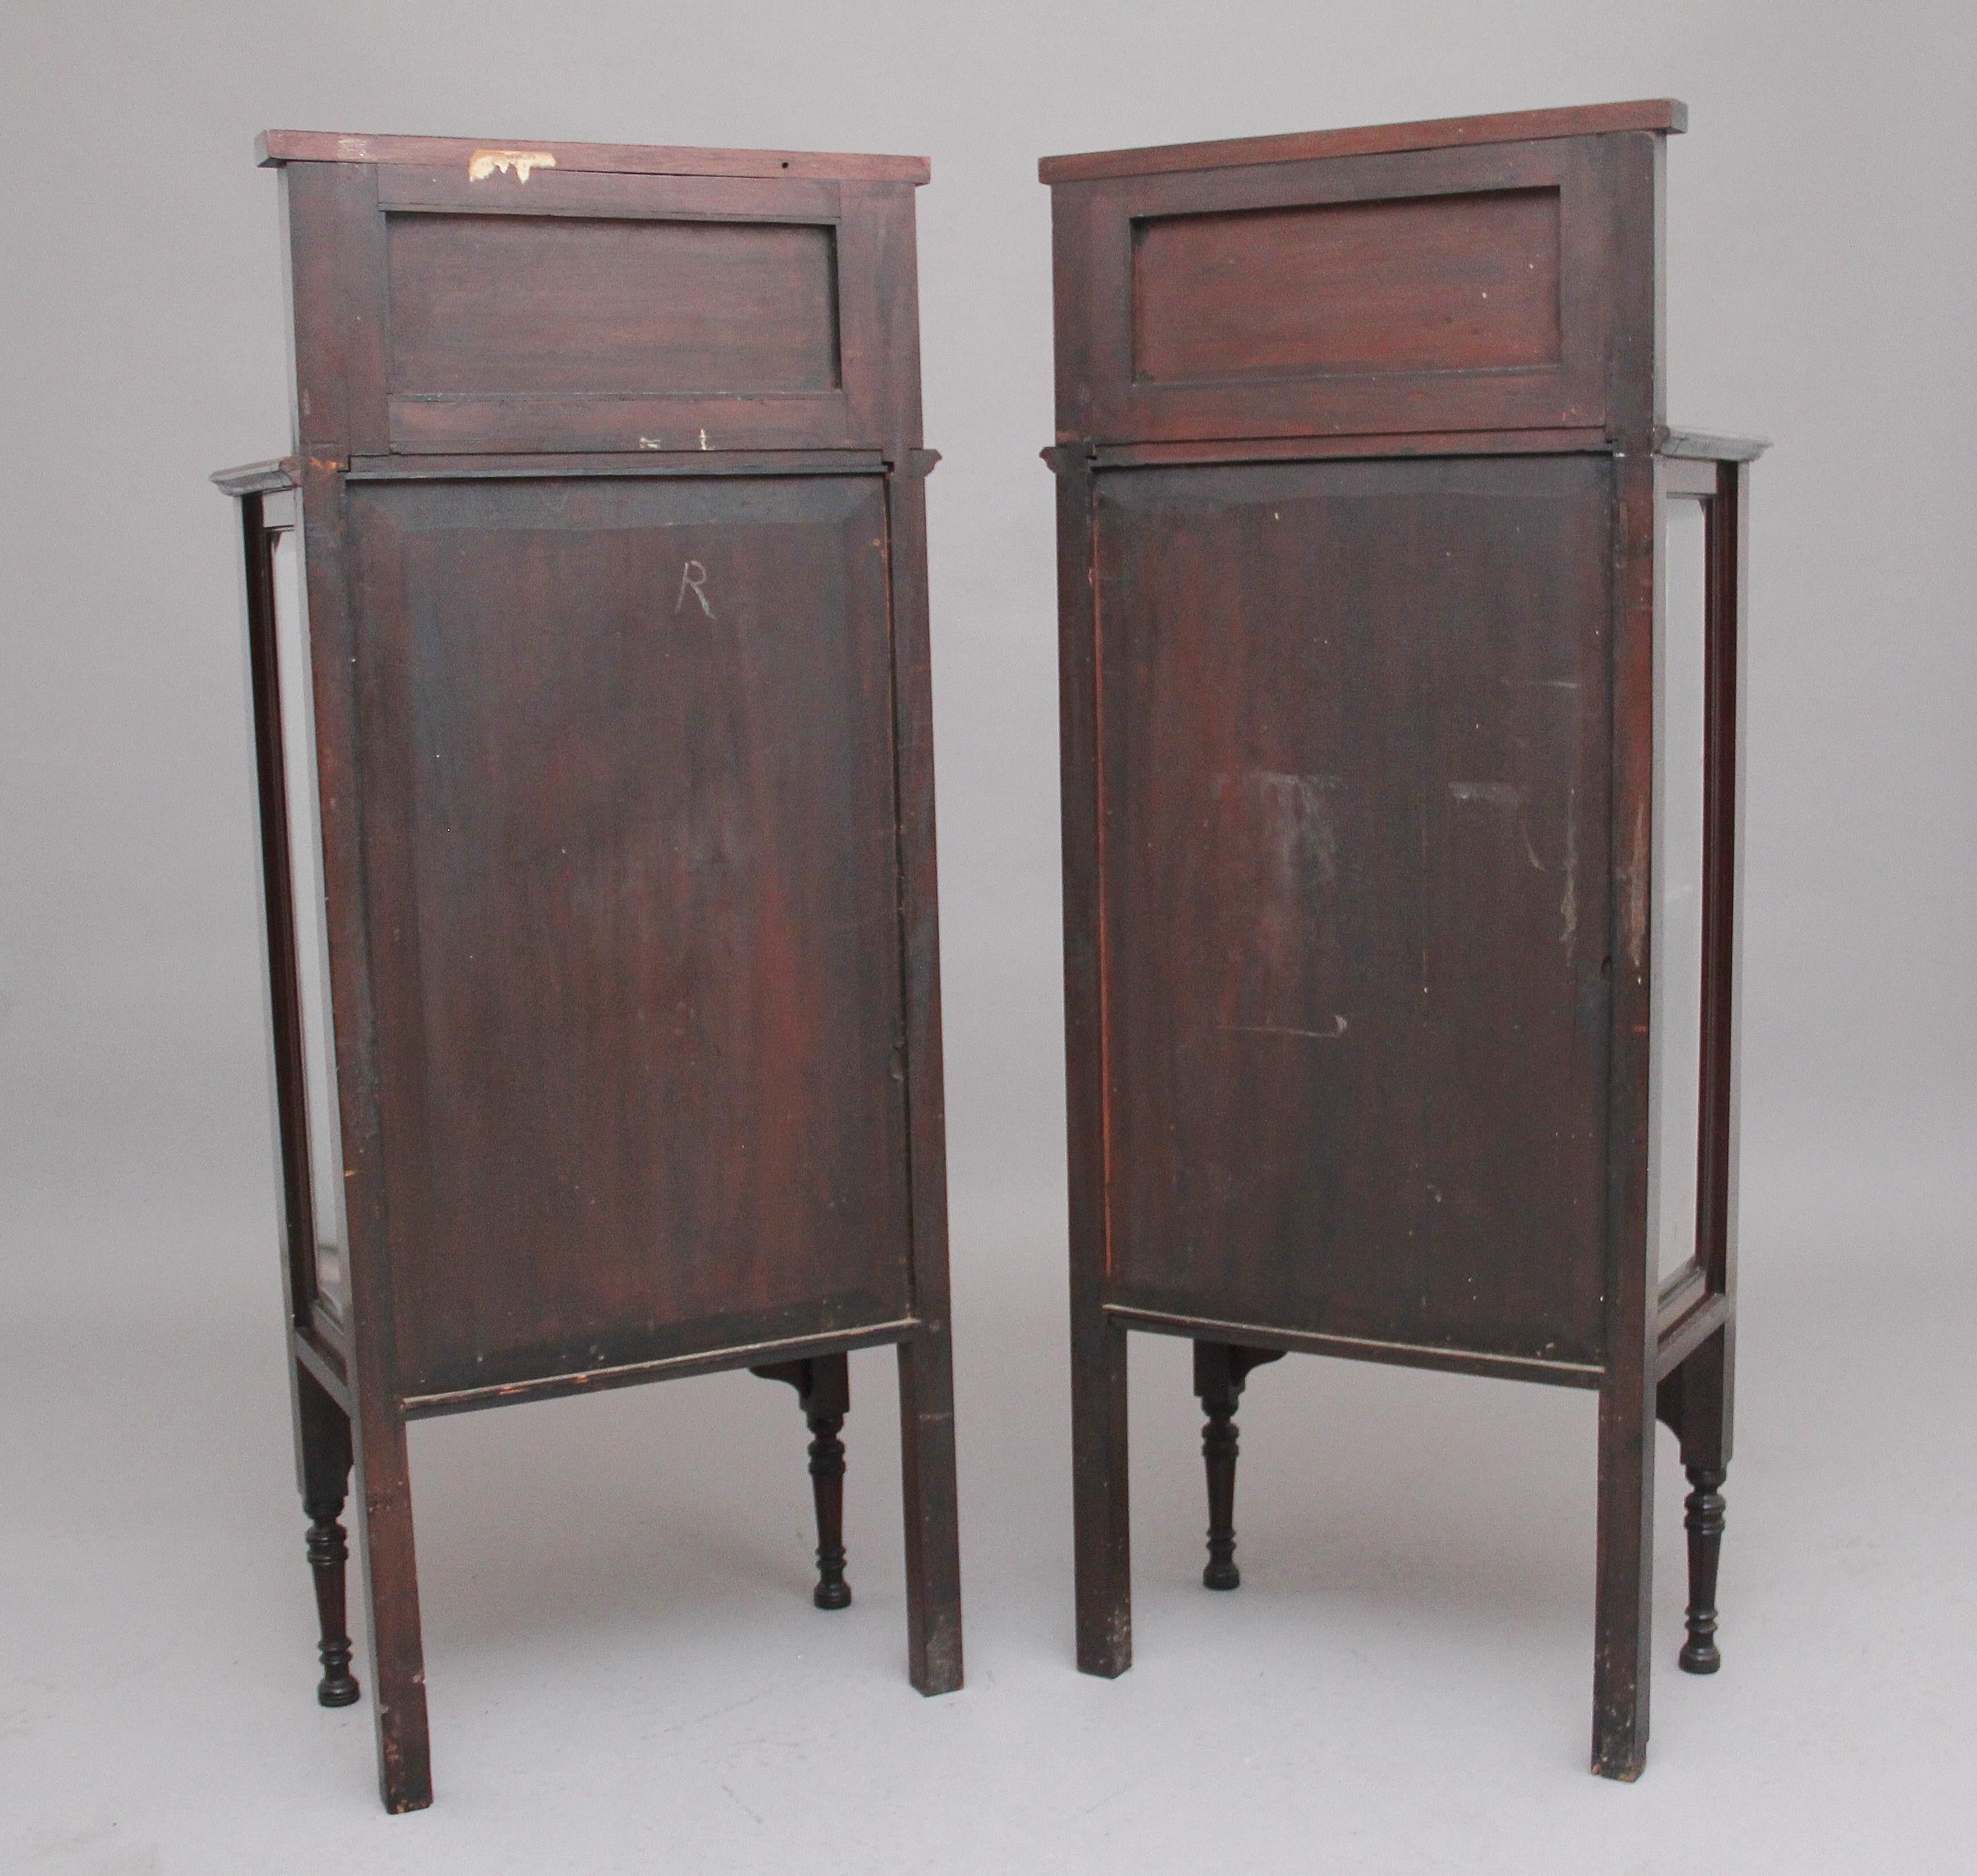 Pair of Early 20th Century Mahogany Display Cabinets In Good Condition For Sale In Martlesham, GB